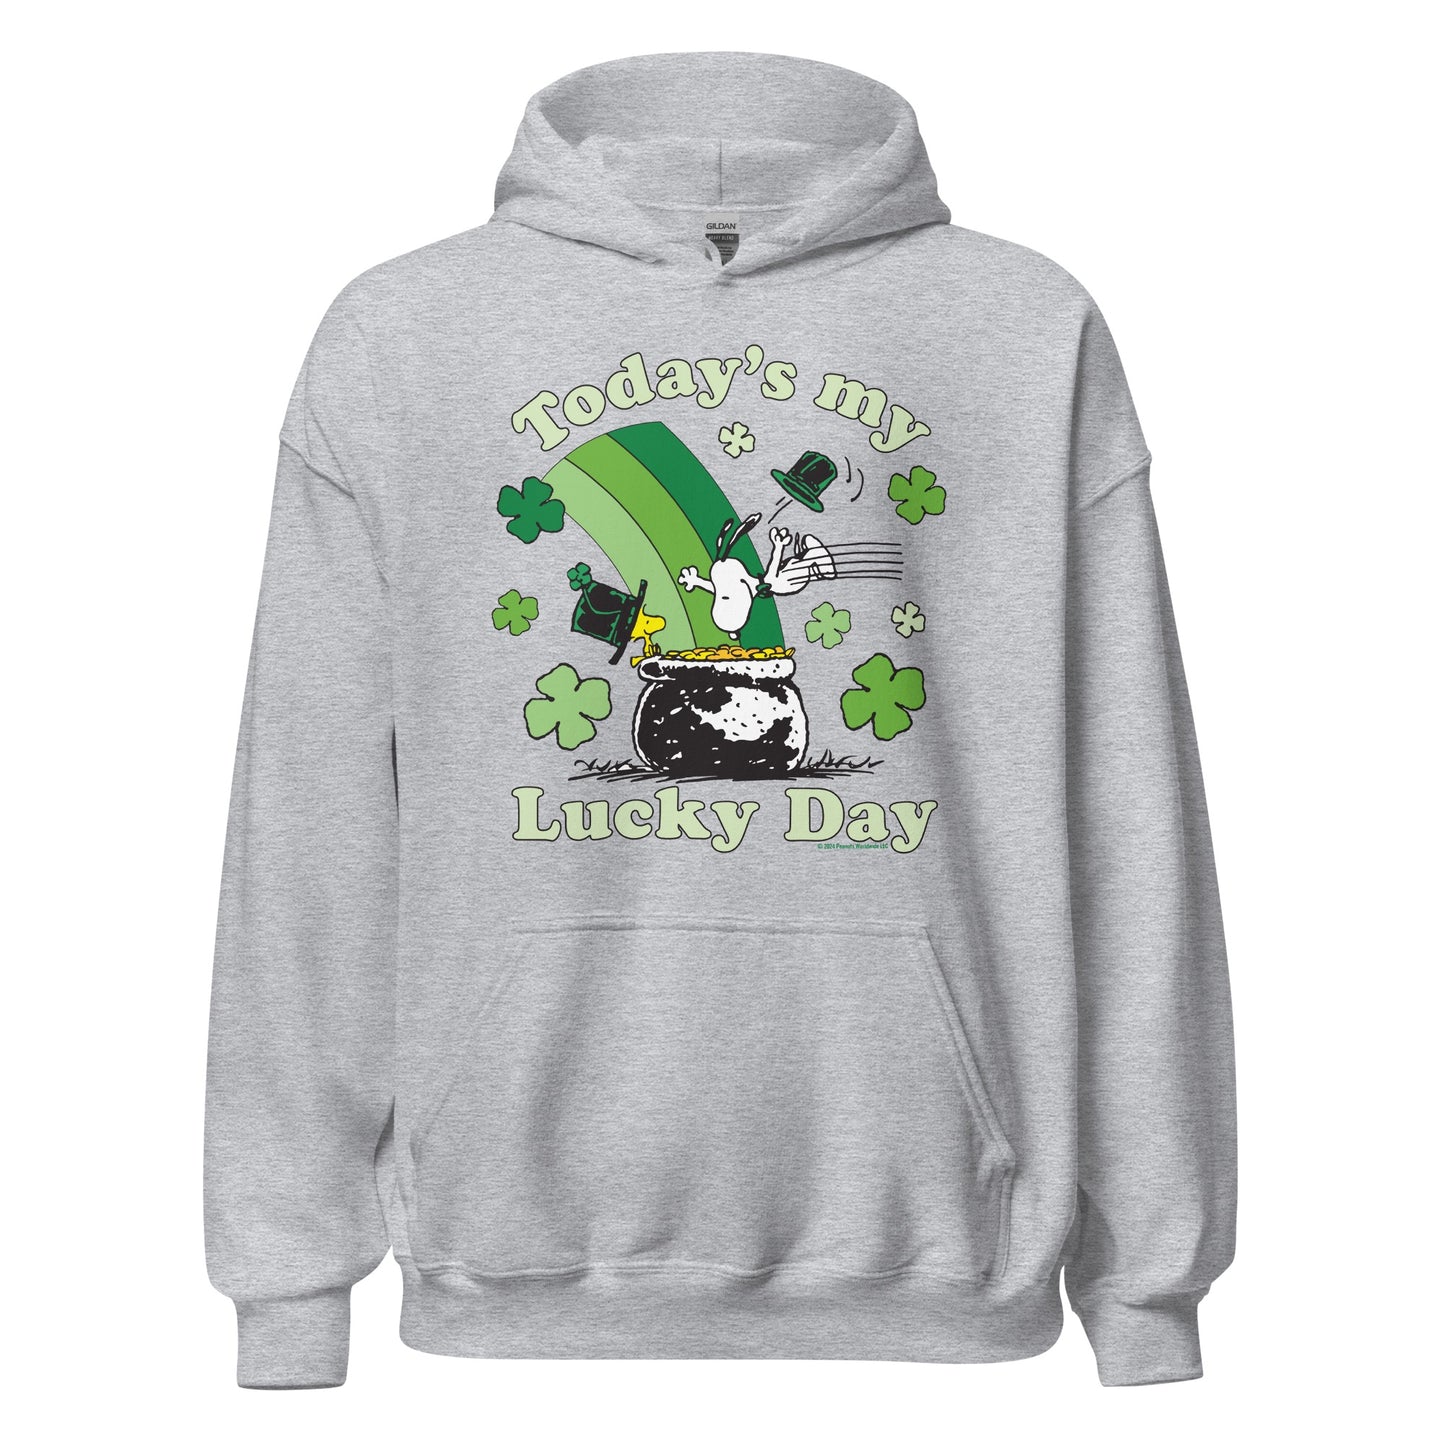 Peanuts Today's My Lucky Day Unisex Hoodie